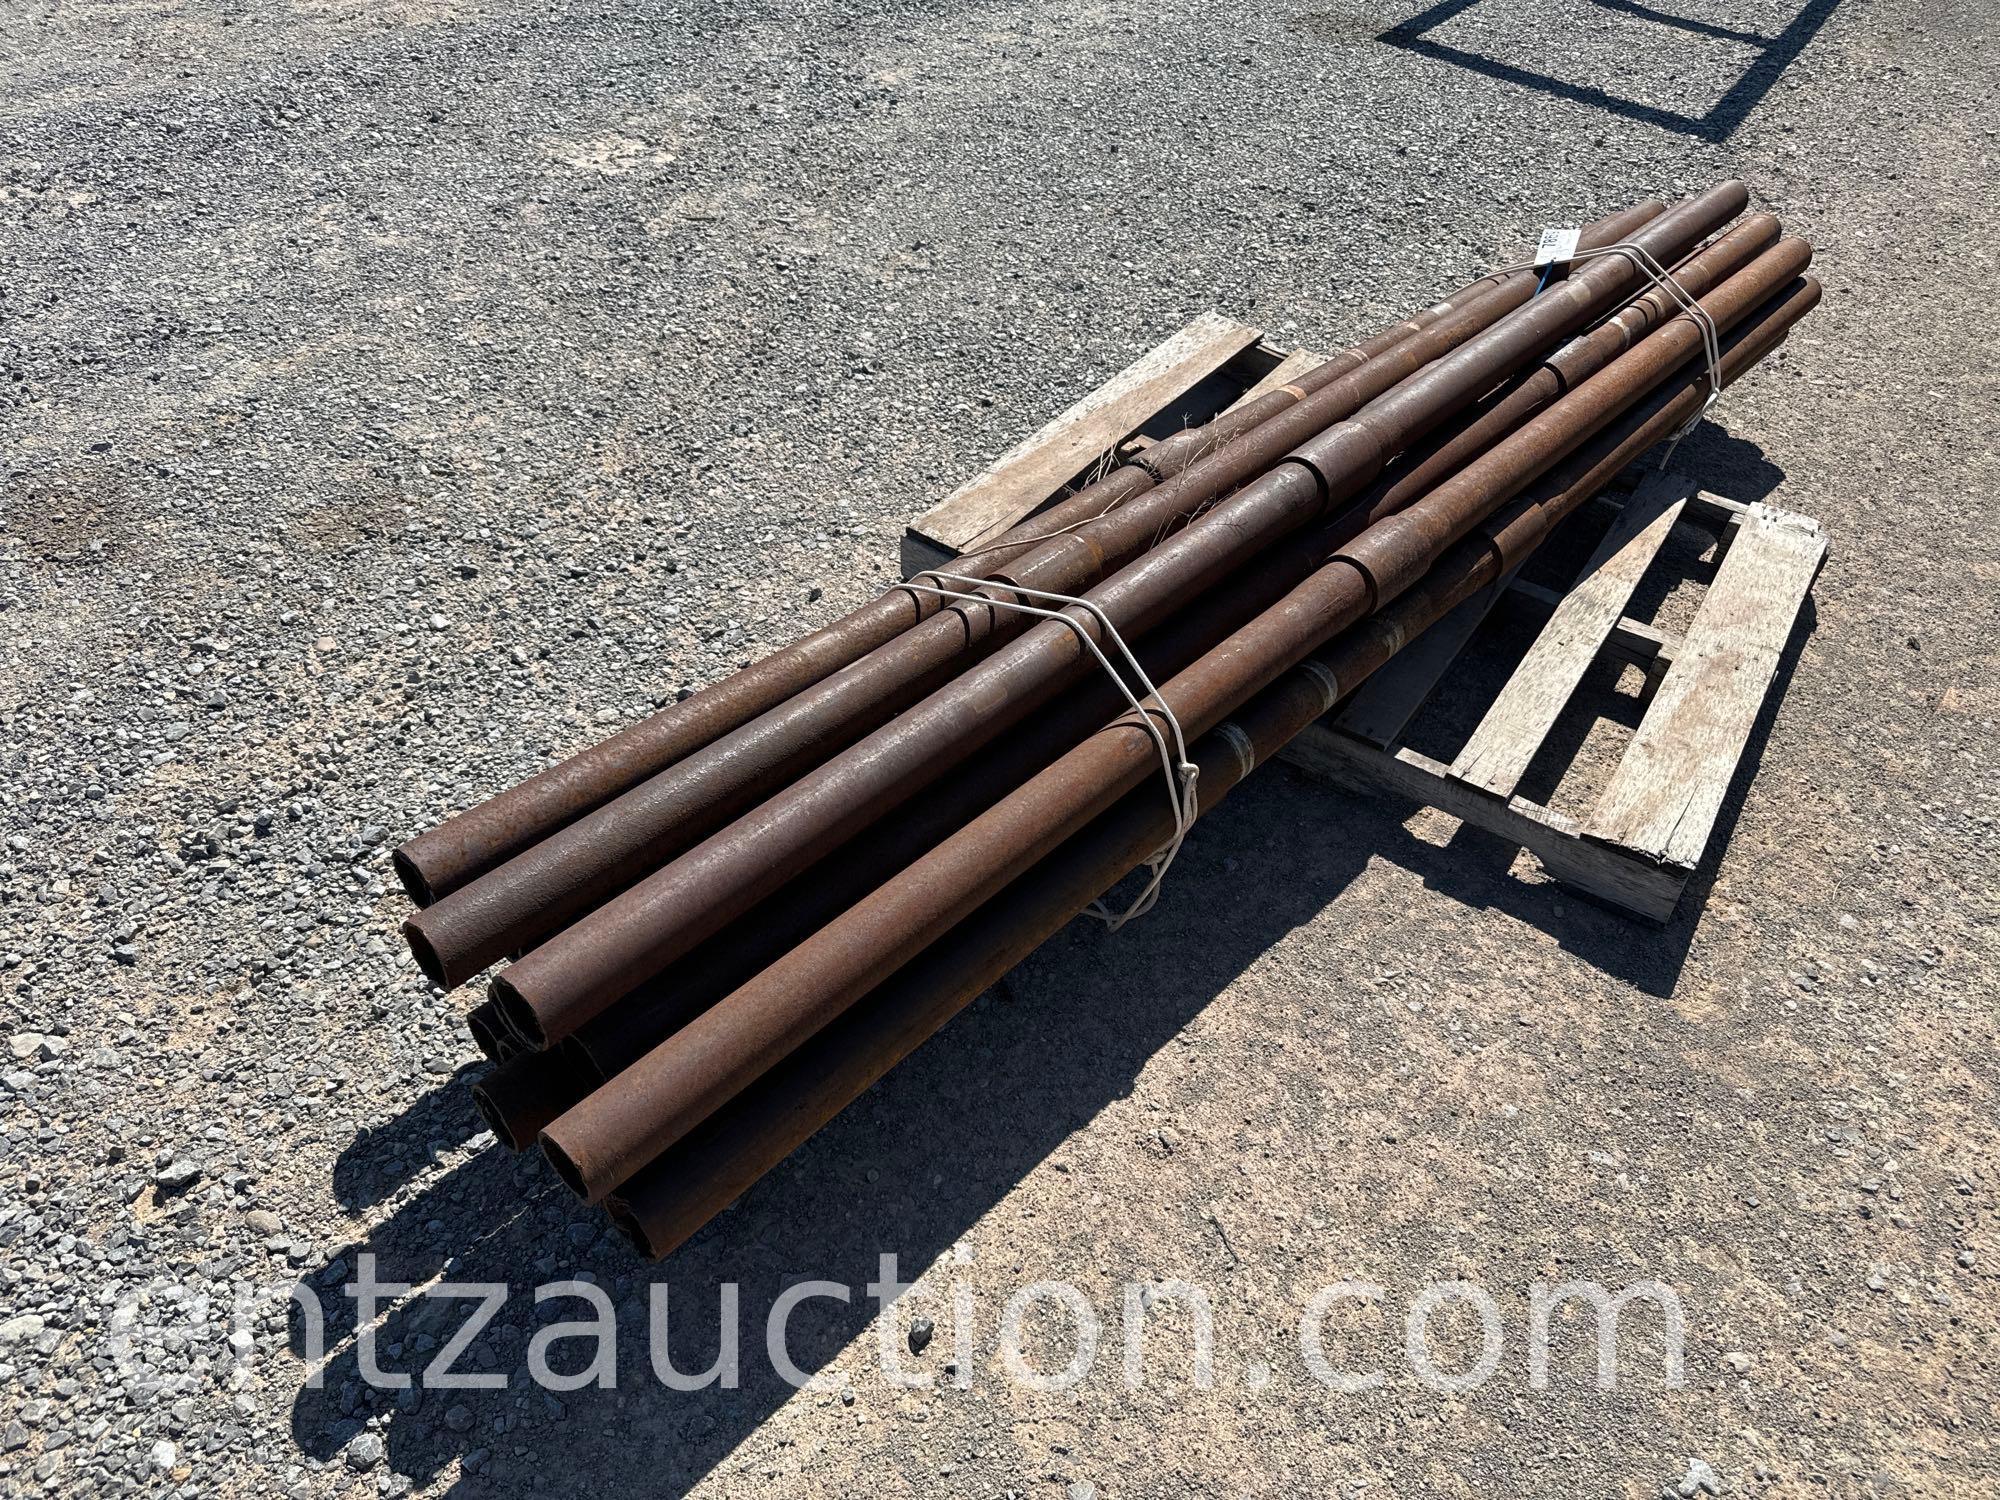 STEEL POSTS 9' X 2 7/8" *SOLD TIMES THE QUANTITY*